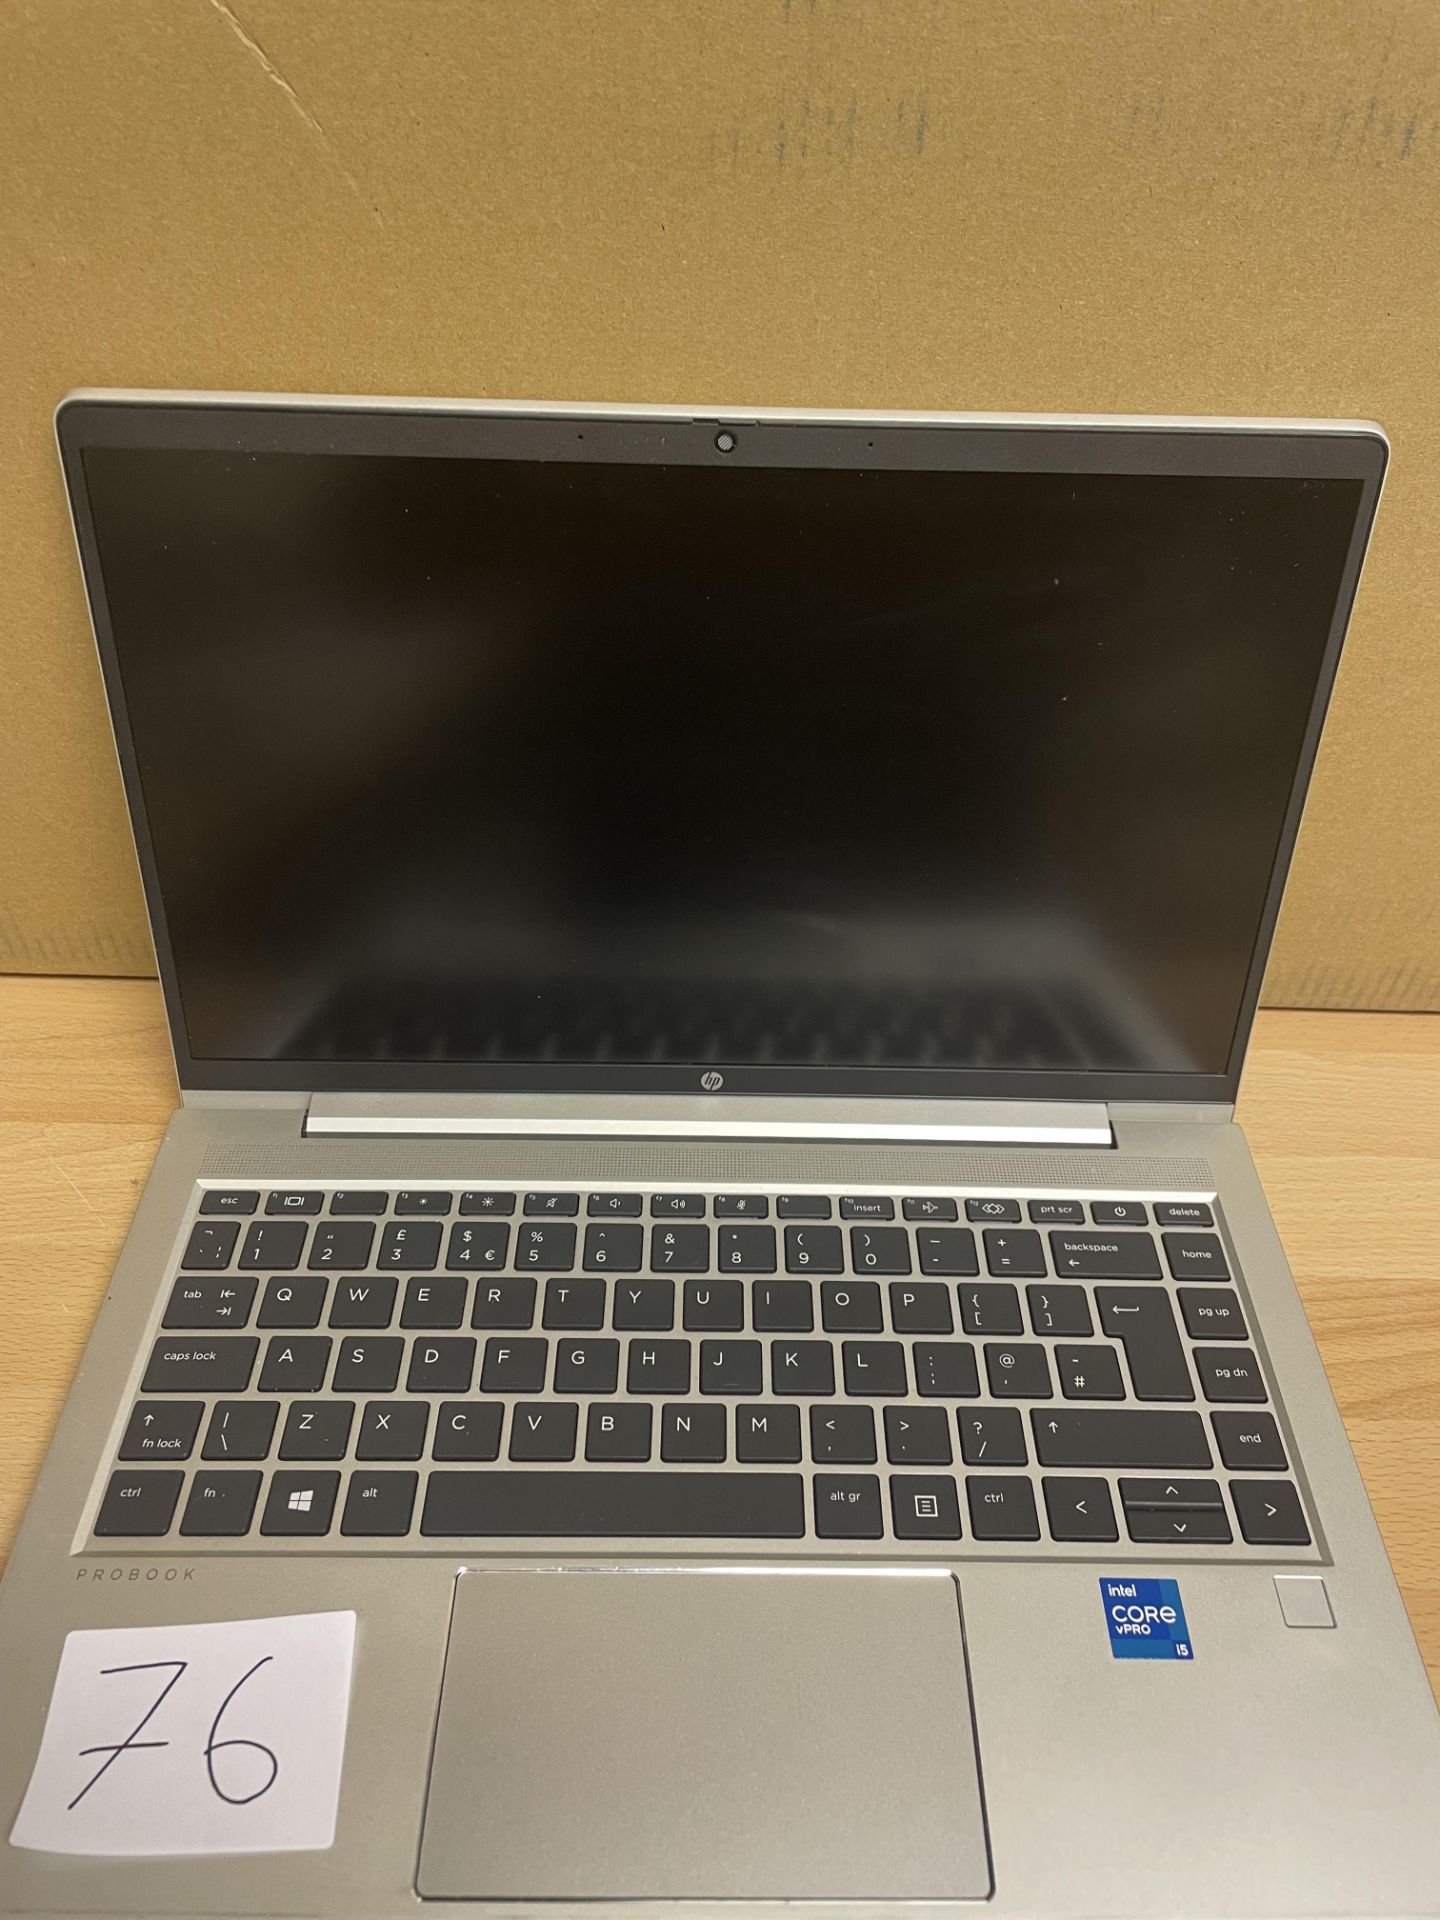 HP, ProBook Core i5 640 G8, No charger or box, slight cosmetic wear, Serial Number 5CD138BJ4H